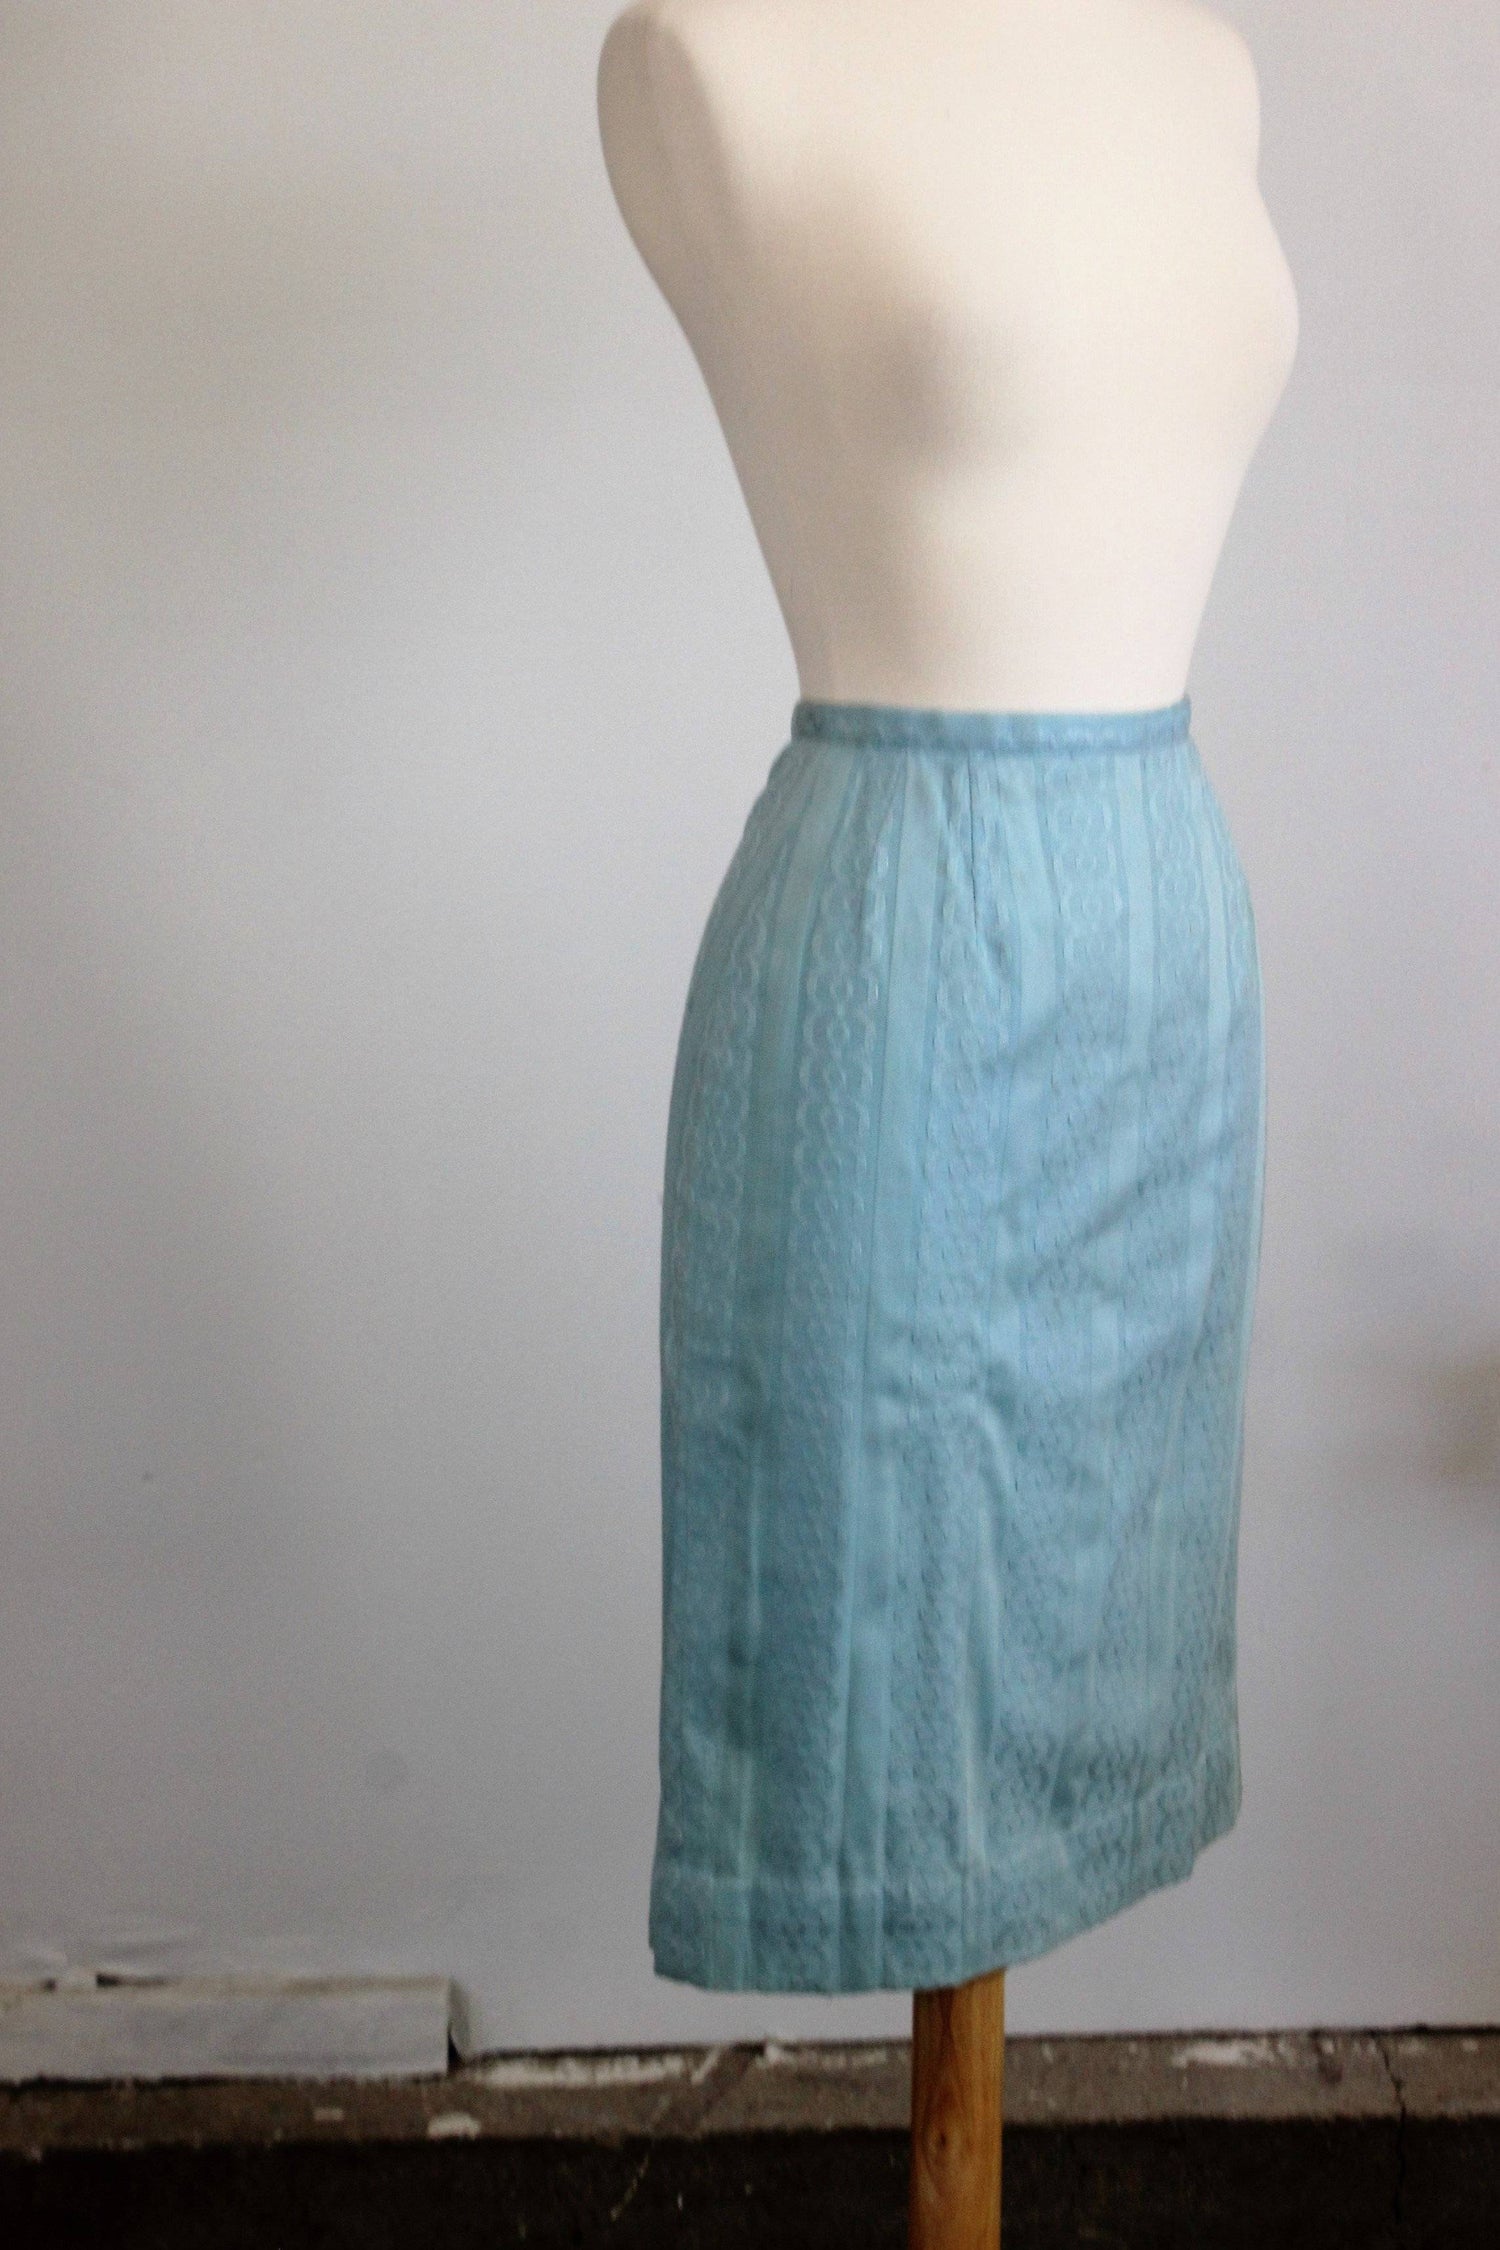 CLEARANCE: Vintage 1950s Blue Pencil Wiggle Skirt by Ardee of California-Toadstool Farm Vintage-1950s Skirt,1950s Wiggle Skirt,Ardee of California,Blue Crocade Skirt,Blue Pencil Skirt,Embroidered Silk,Extra Small,Vintage,Vintage Clothing,Vintage Skirt